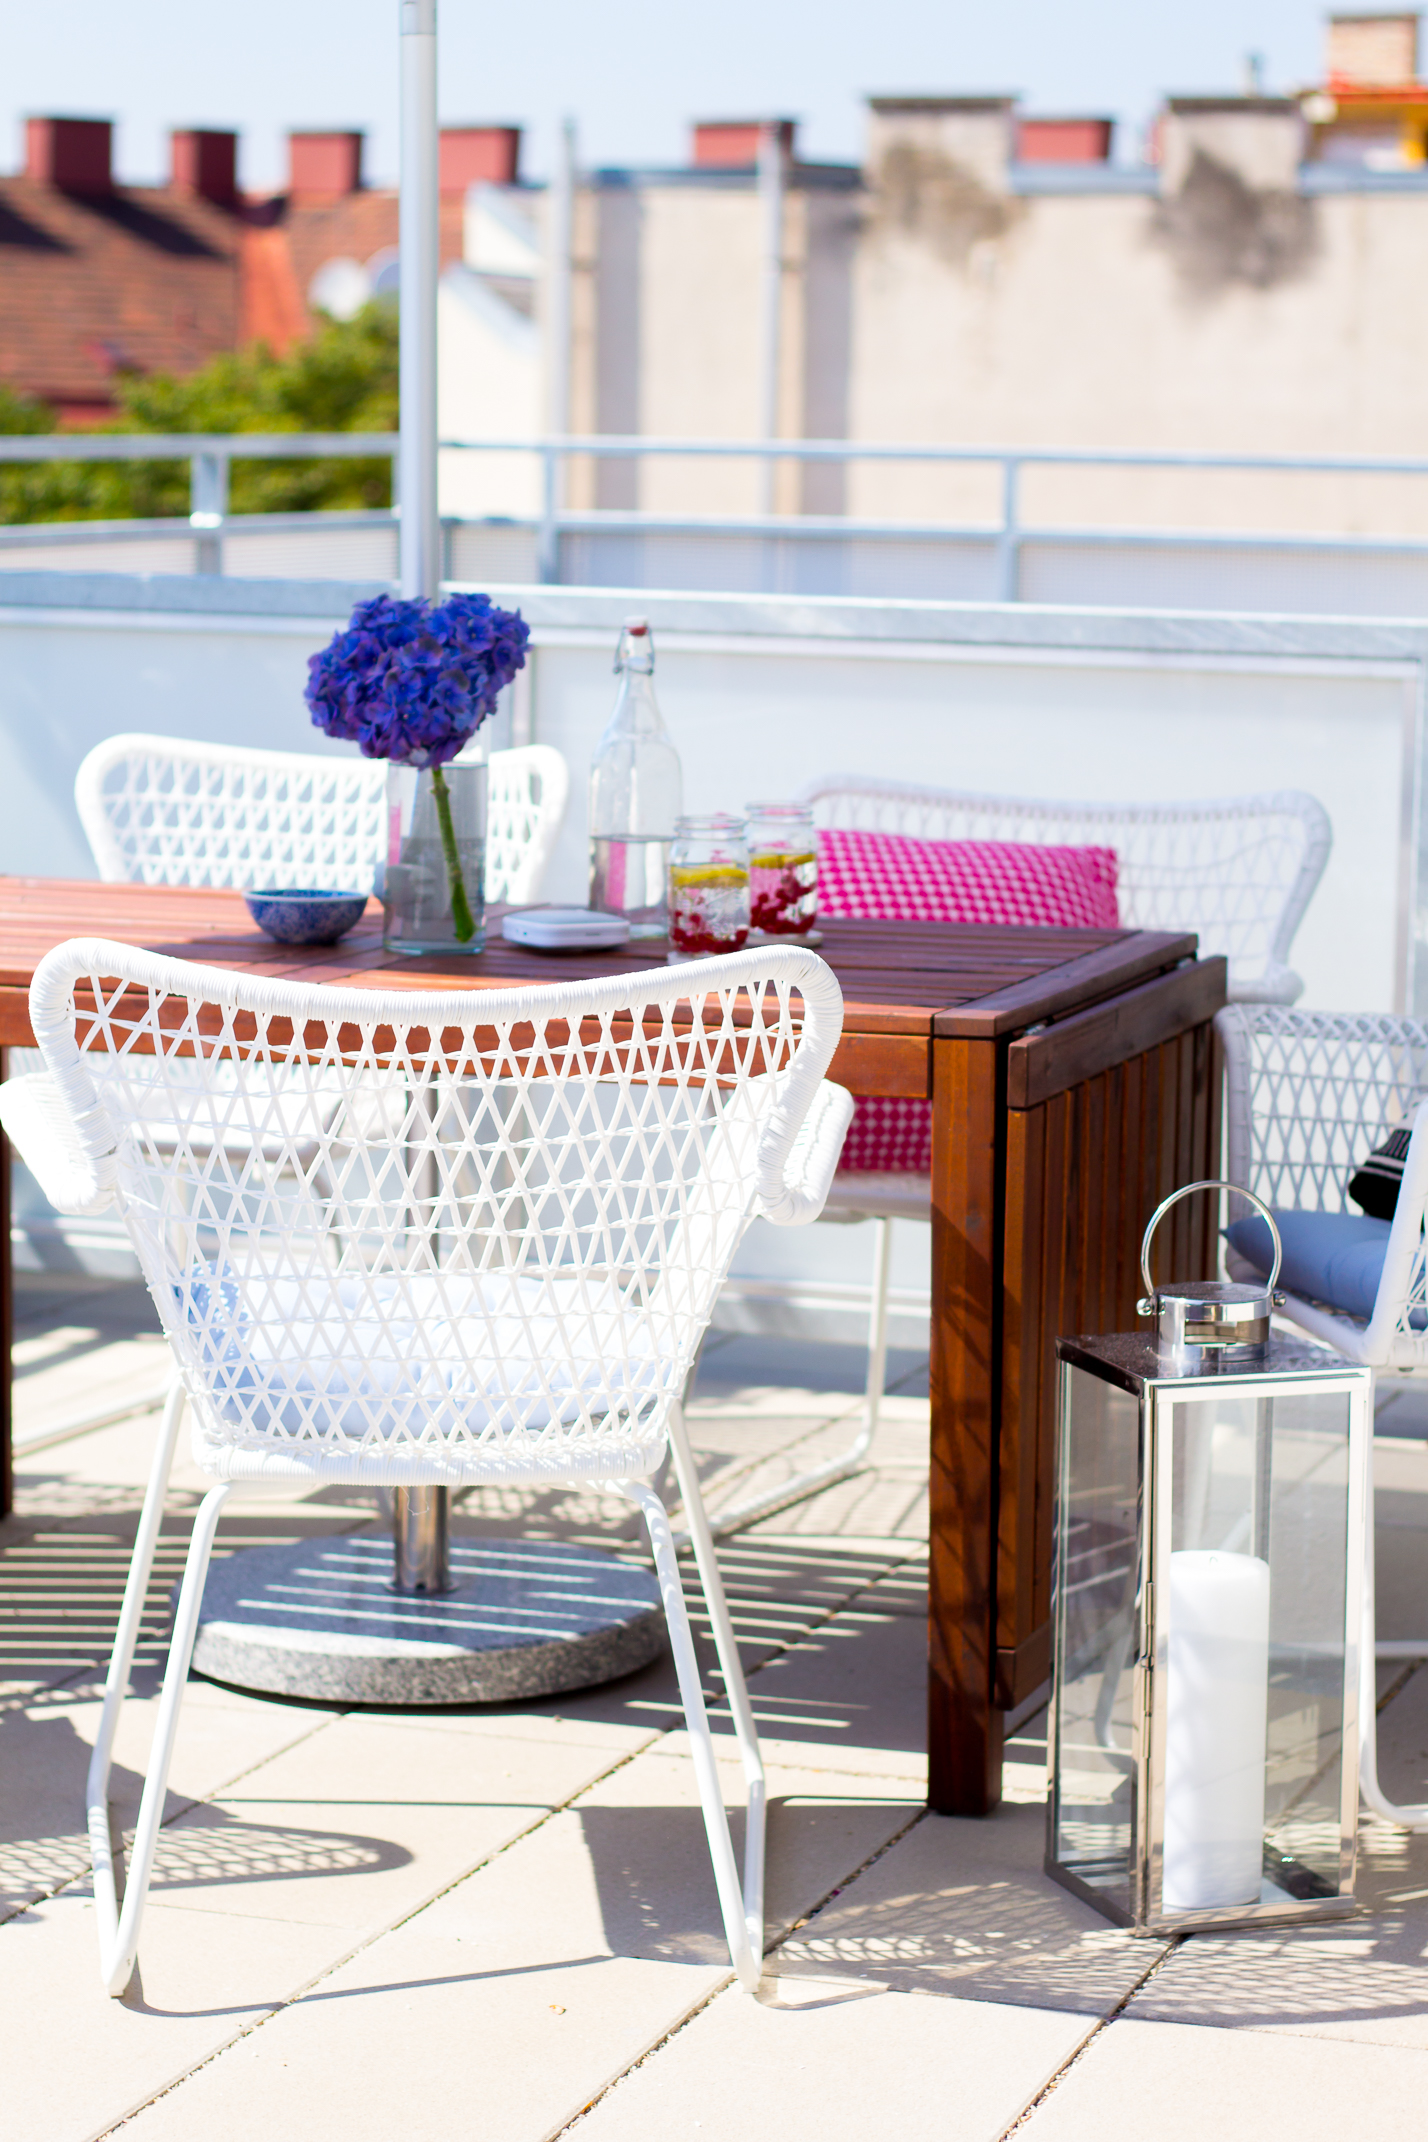 Outdoor Living - Rooftop Terrace Inspiration | Love Daily Dose